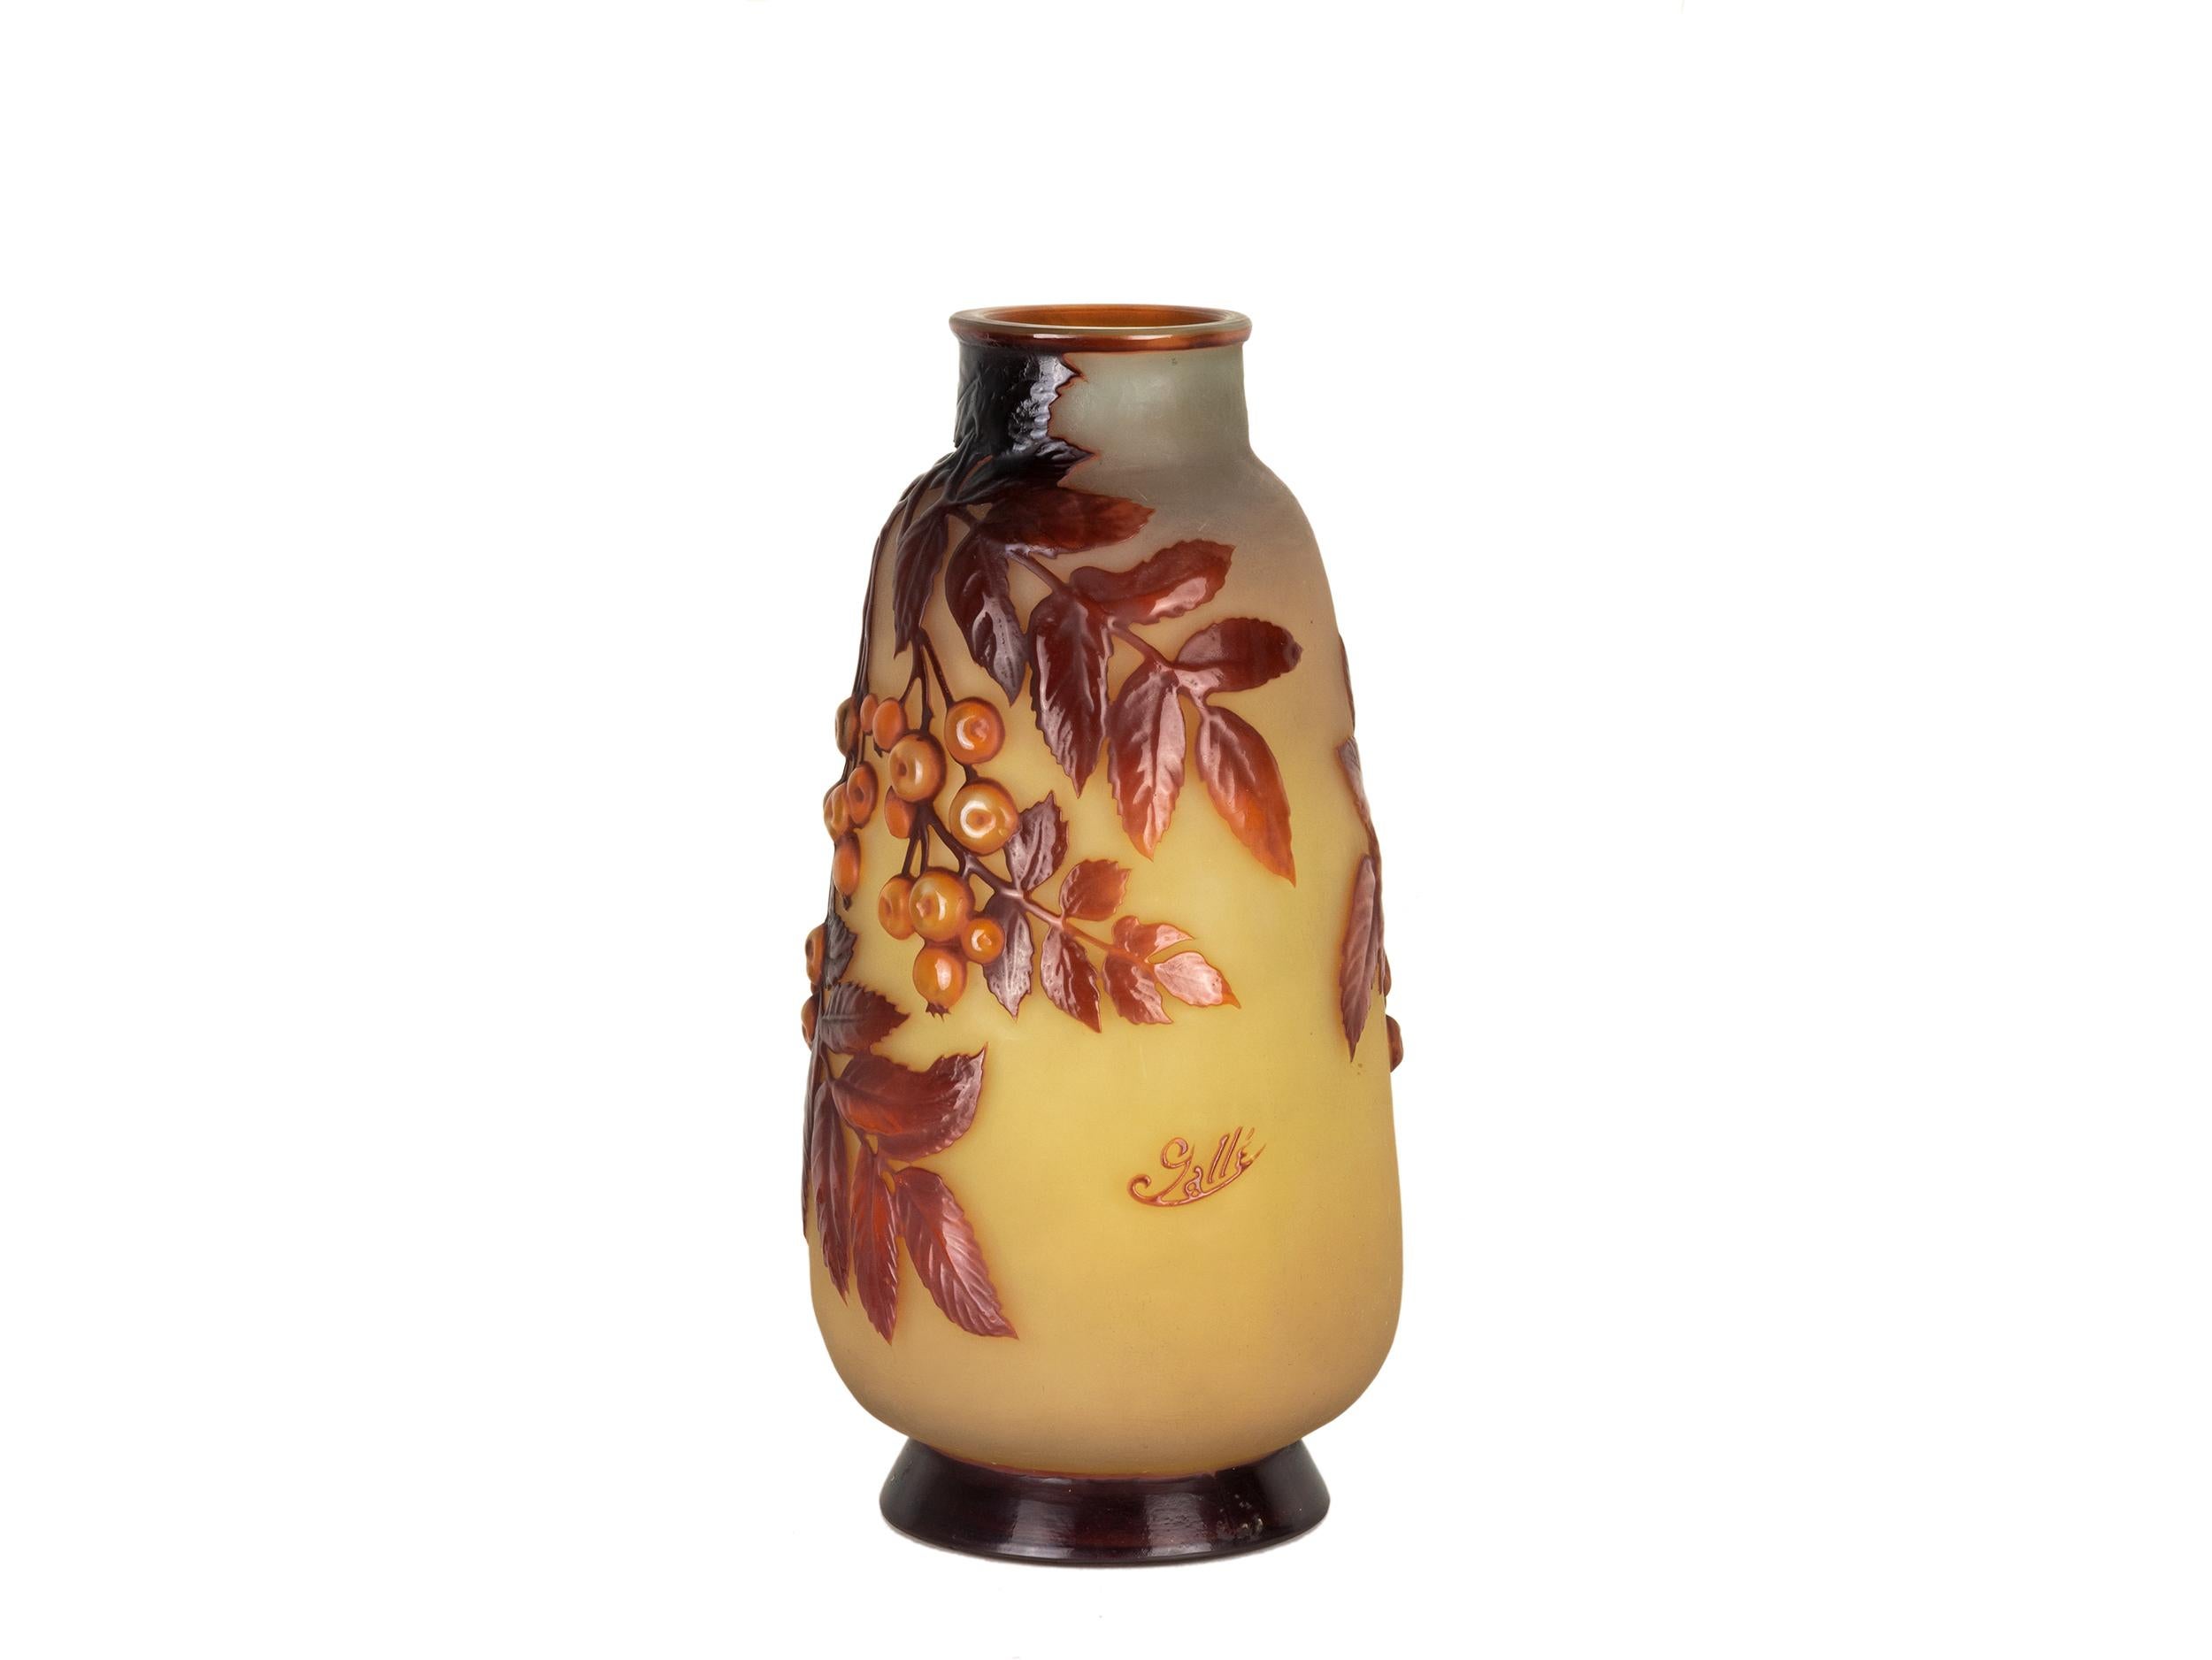 A rare Etablissement Galle 'Cherries' mold-blown souffle cameo glass vase.
The baluster body with acid-etched and mold-blown decoration, in shades of red on an etched yellow and opaque ground, above a spreading circular foot, acid-etched 'Galle'.